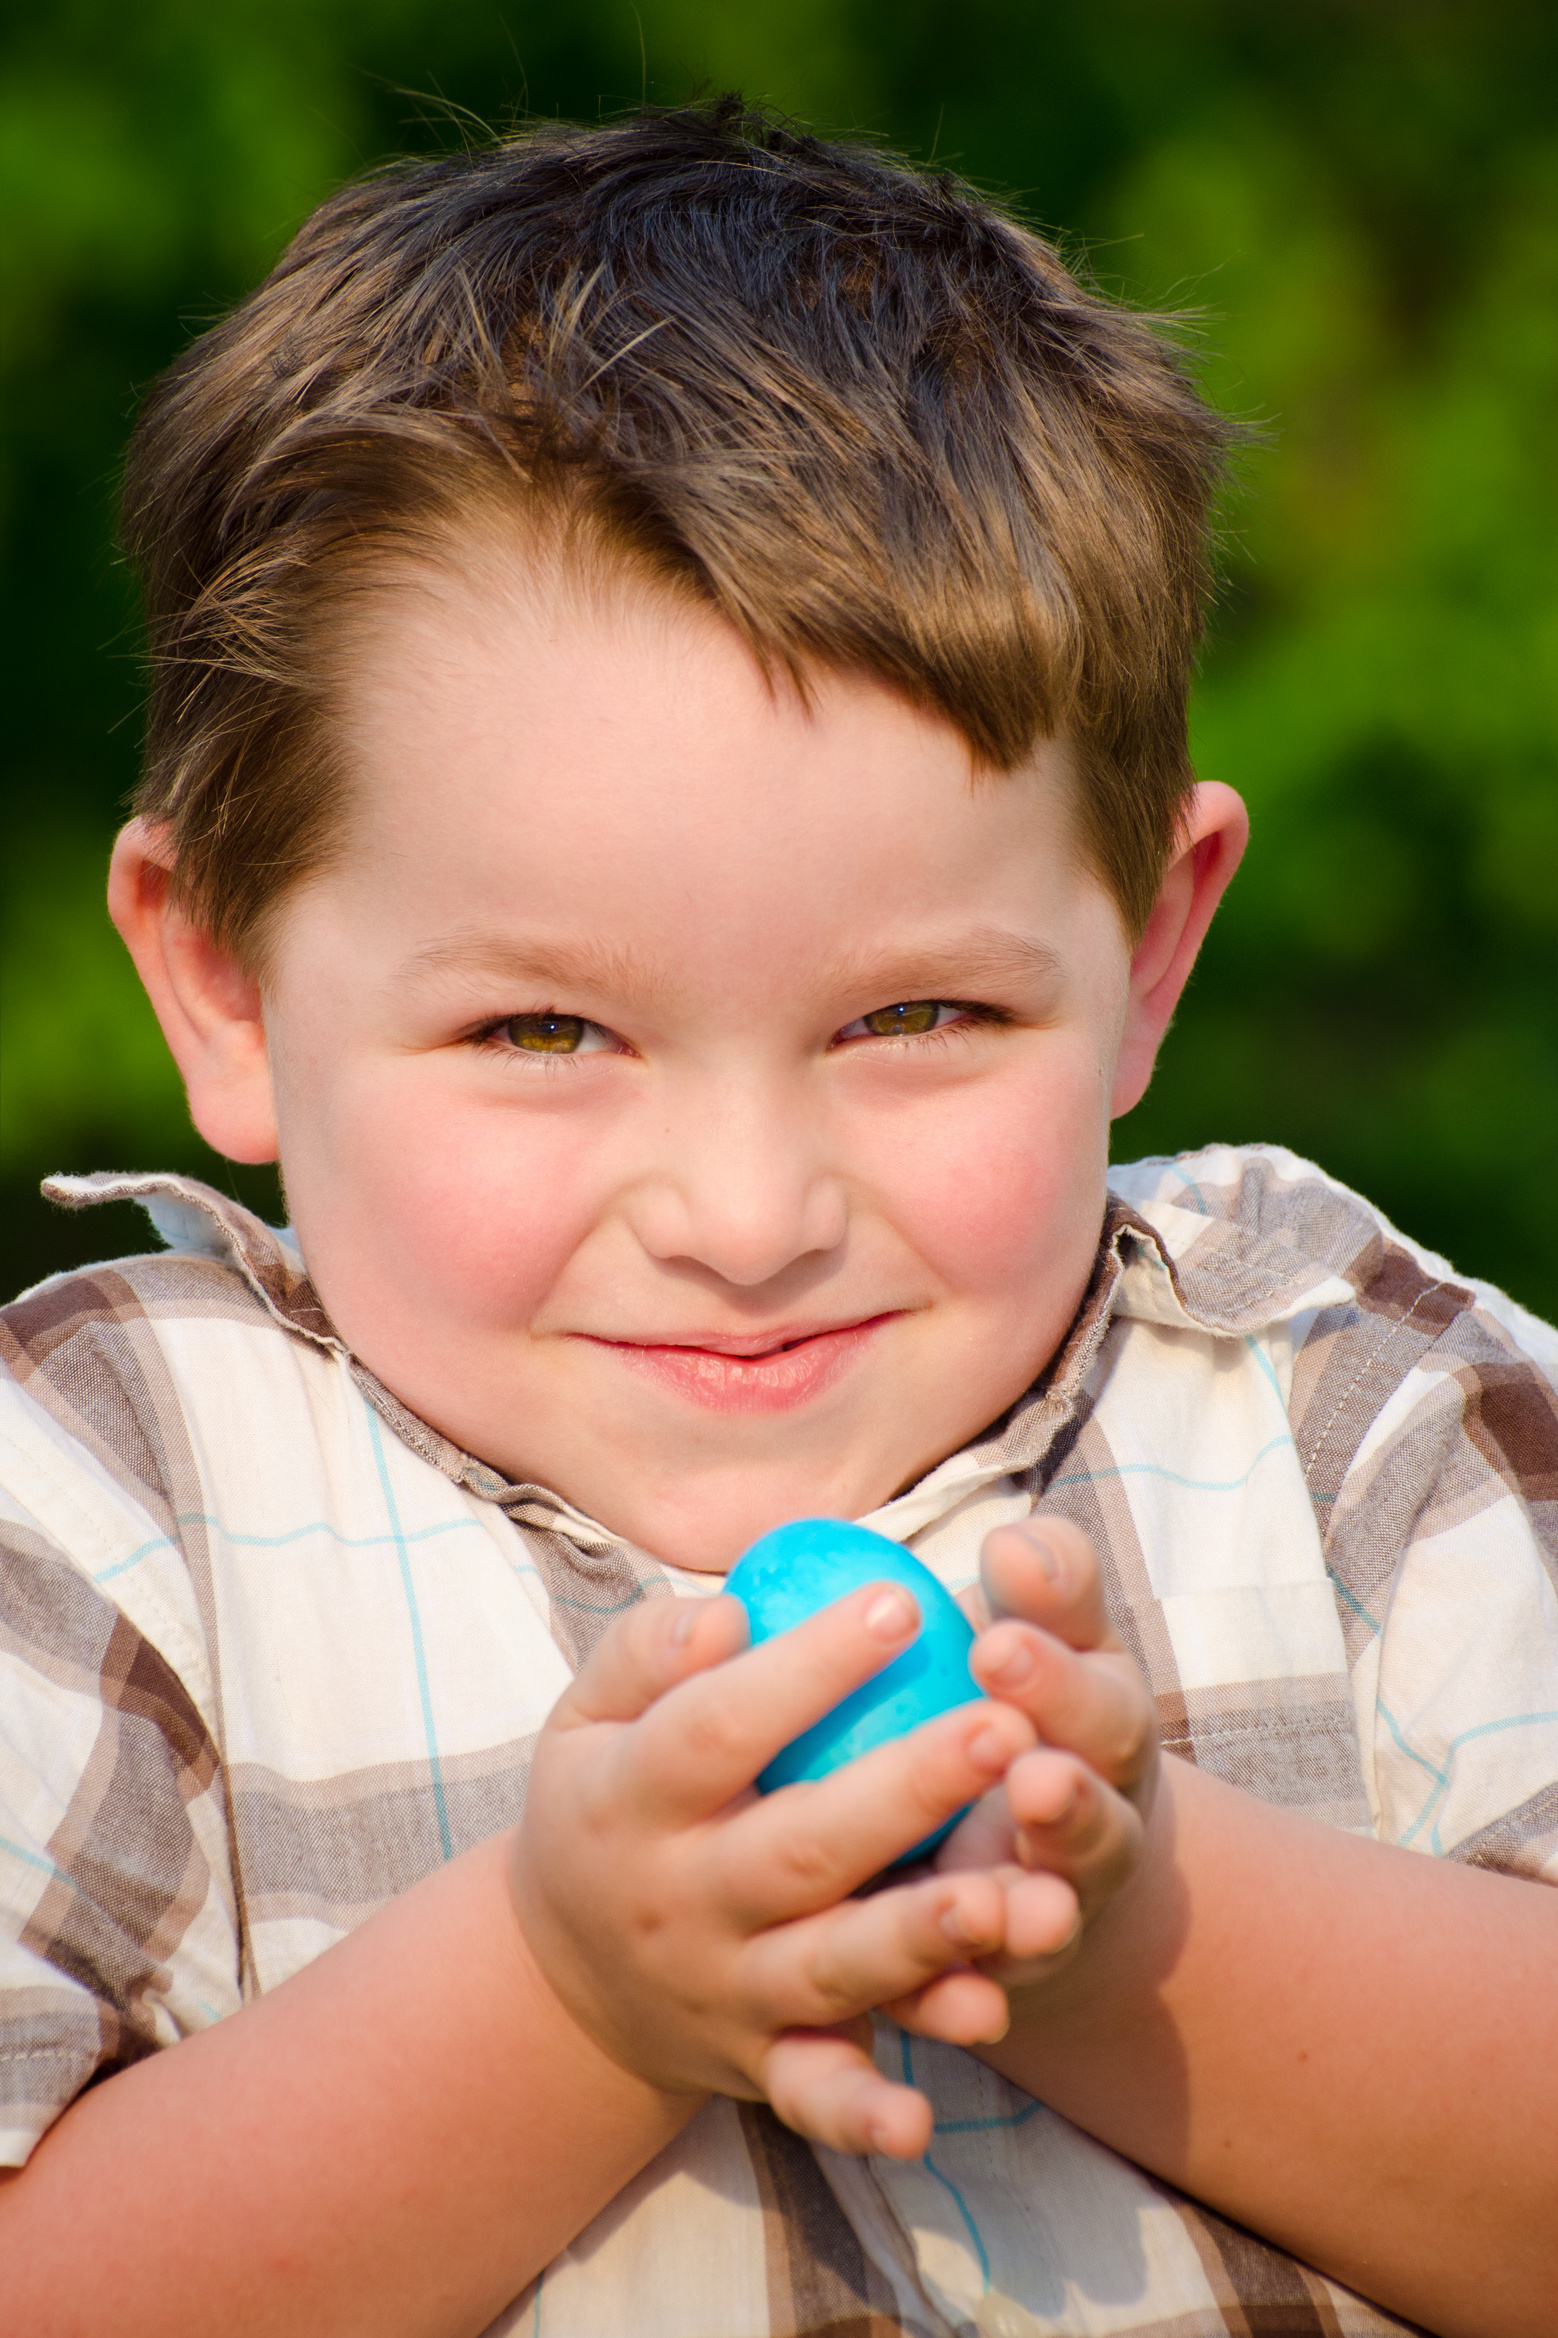 25 Candy Free Easter Basket Goodies for Boys